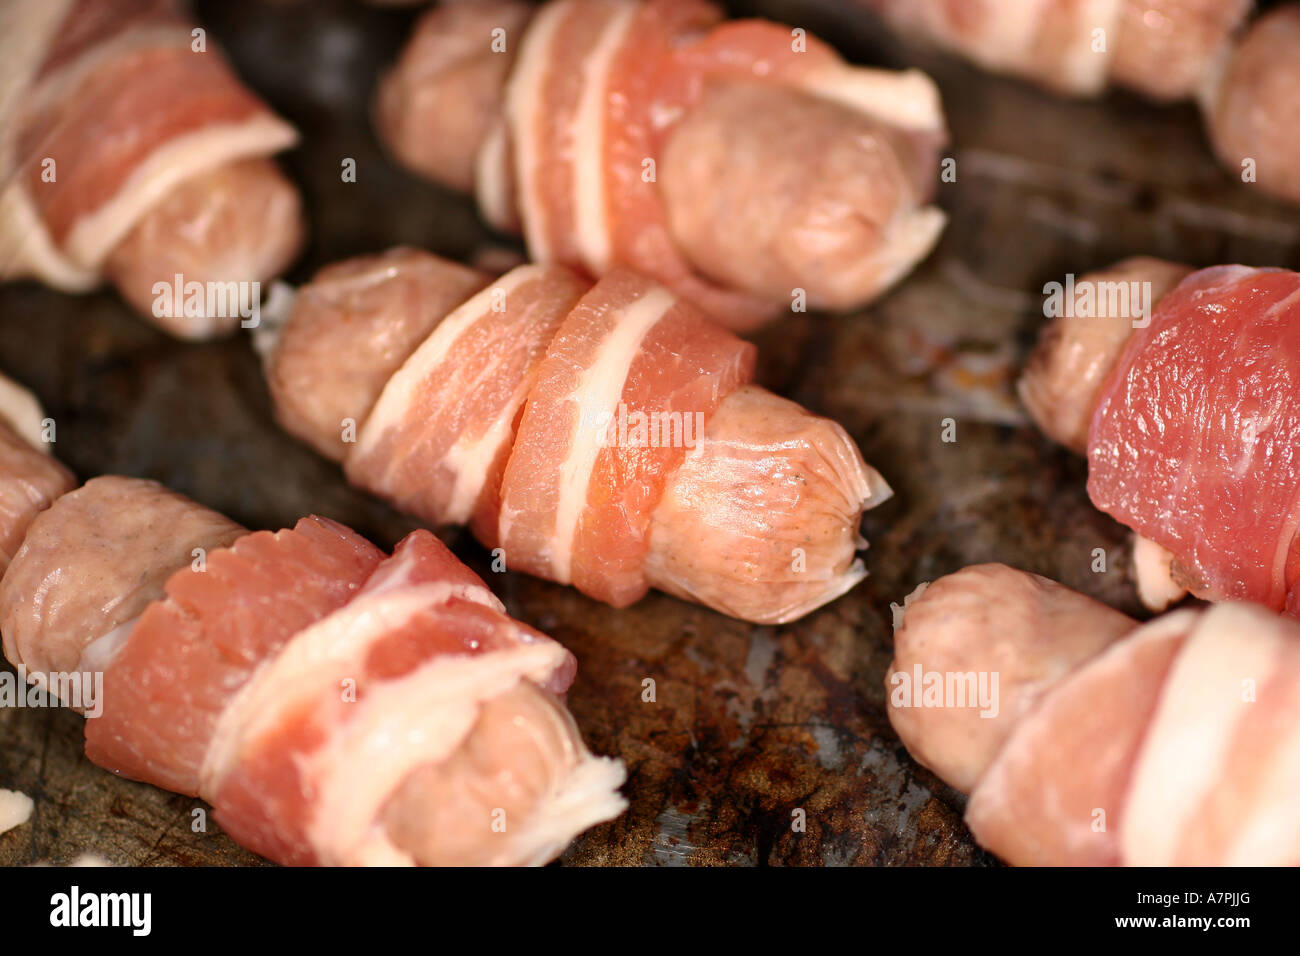 Small cocktail sausages wrapped with Bacon on a tray ready for cooking. Stock Photo